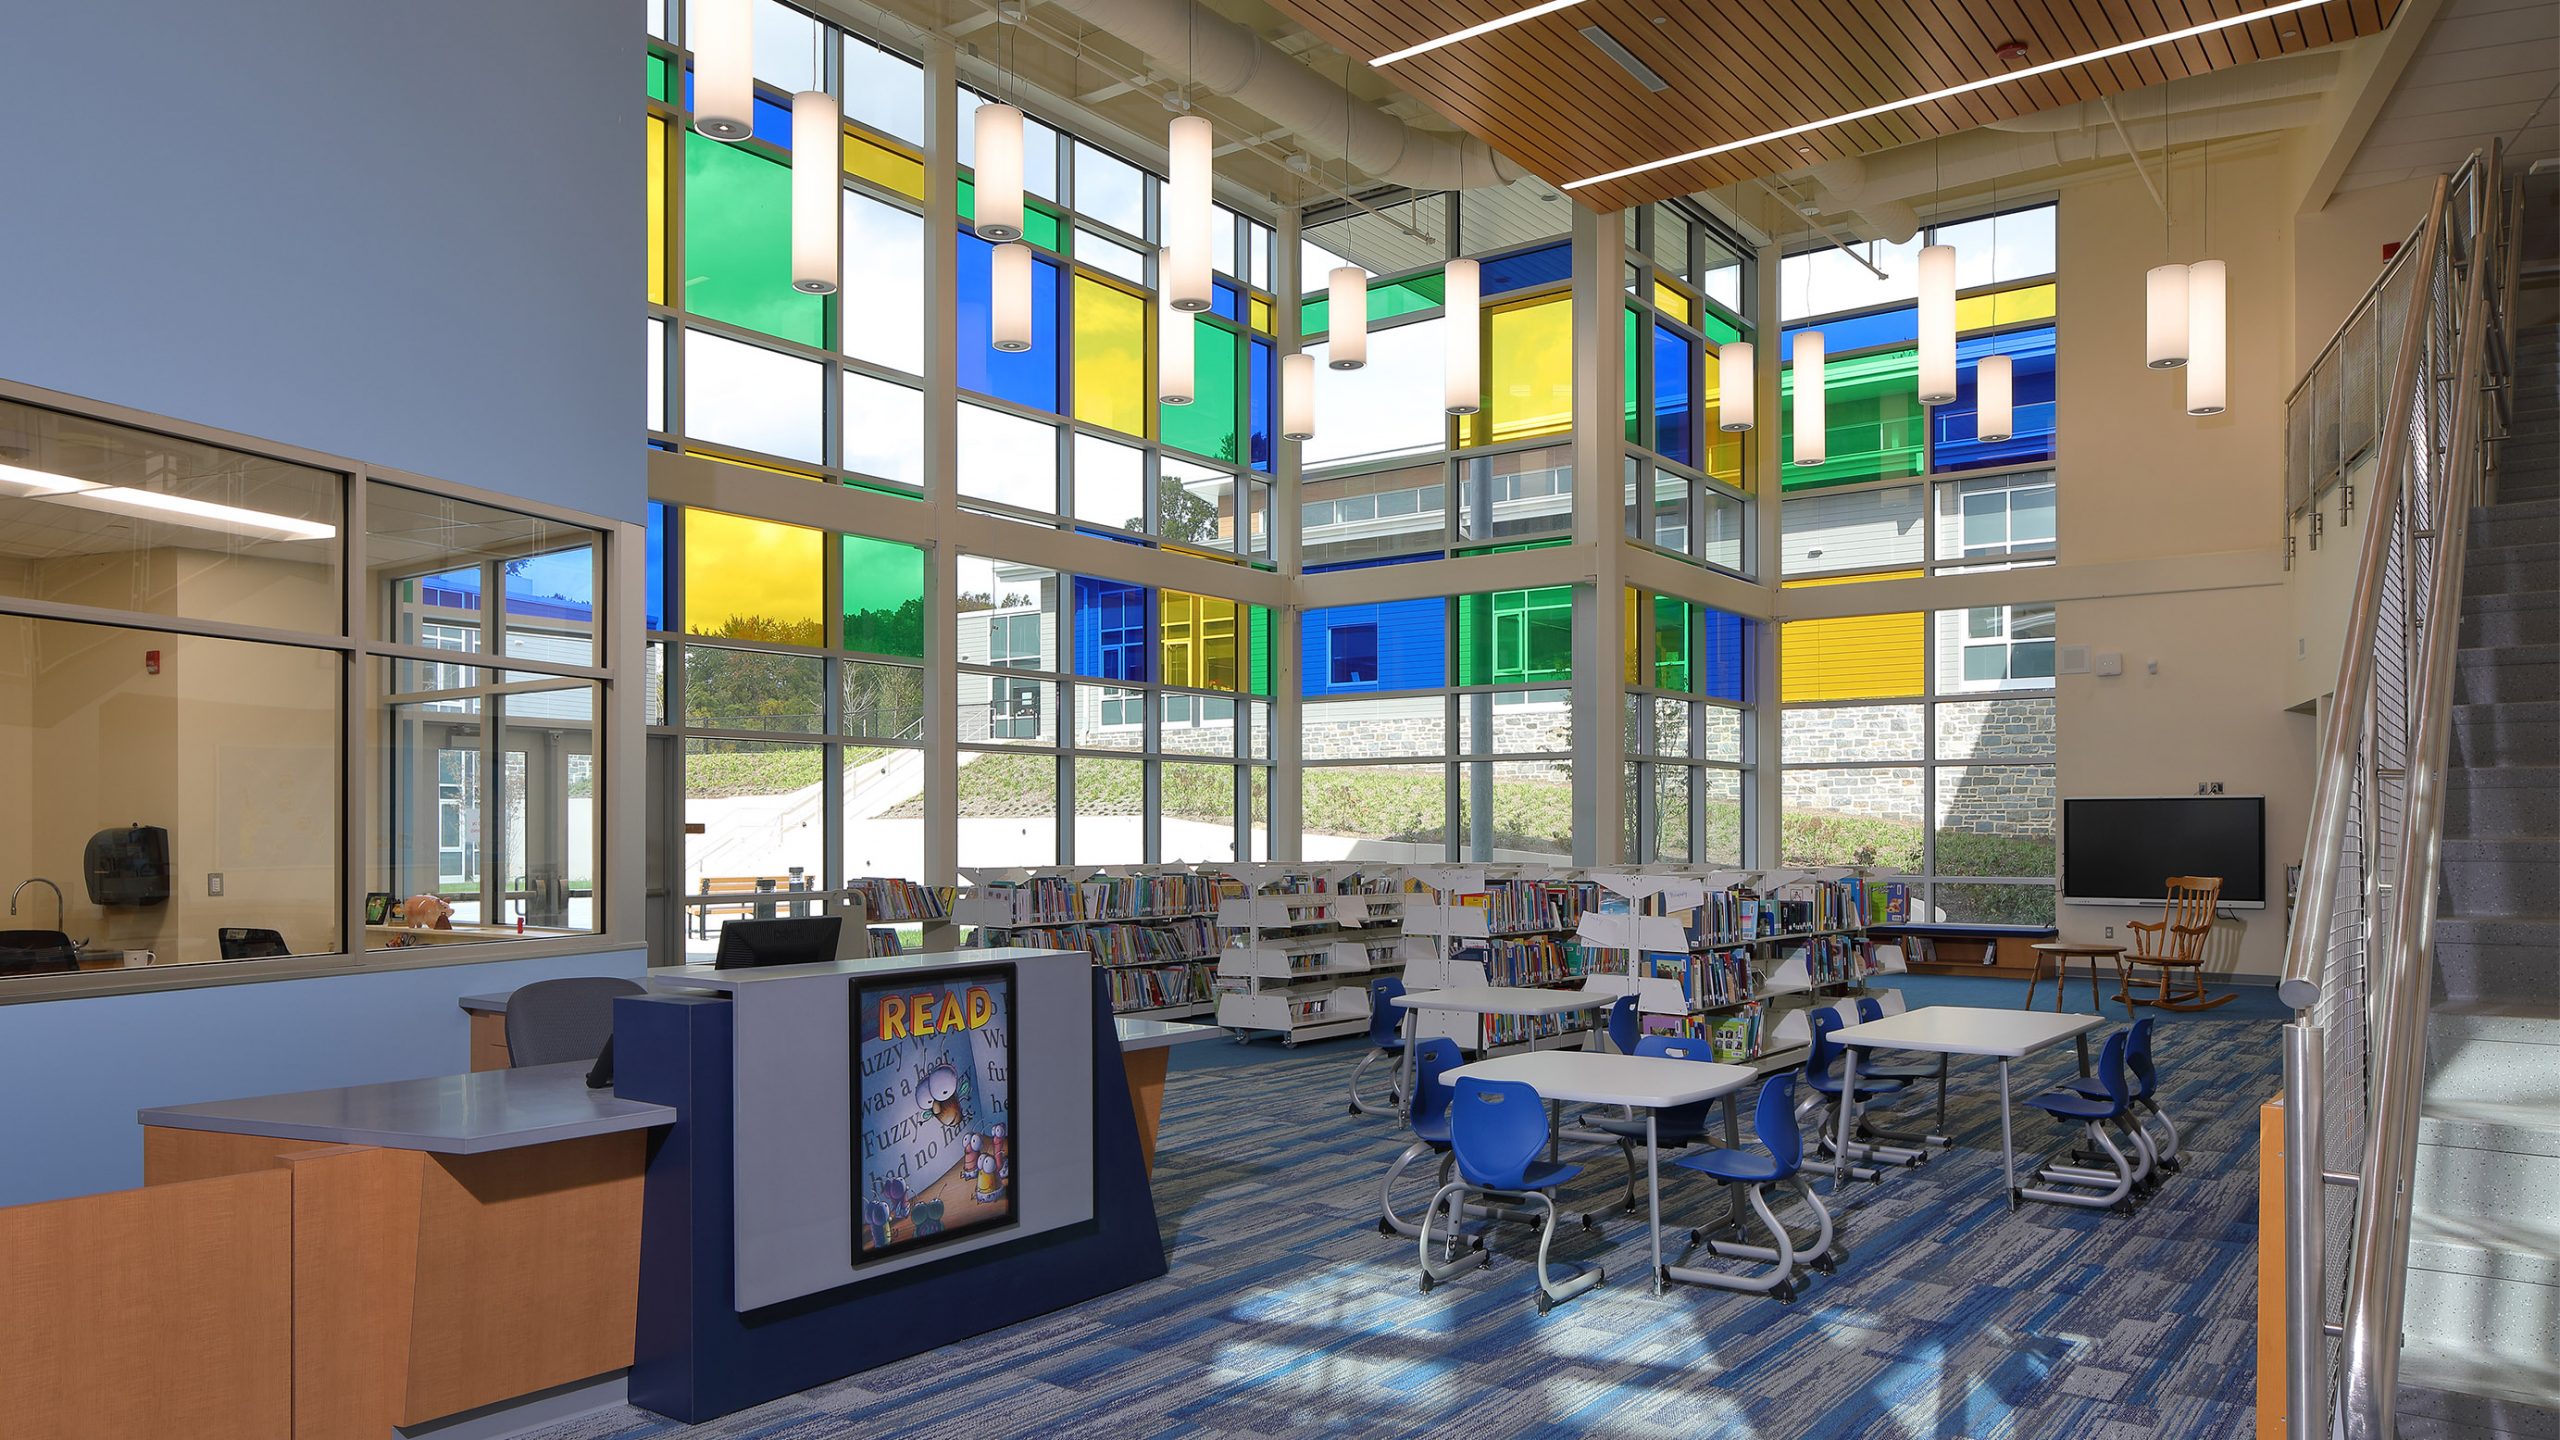 1_Media-Resource-Center_SCHRADERGROUP_Learning-By-Design-Fall-2021-Outstanding Project-Enfield-ELC-SDST